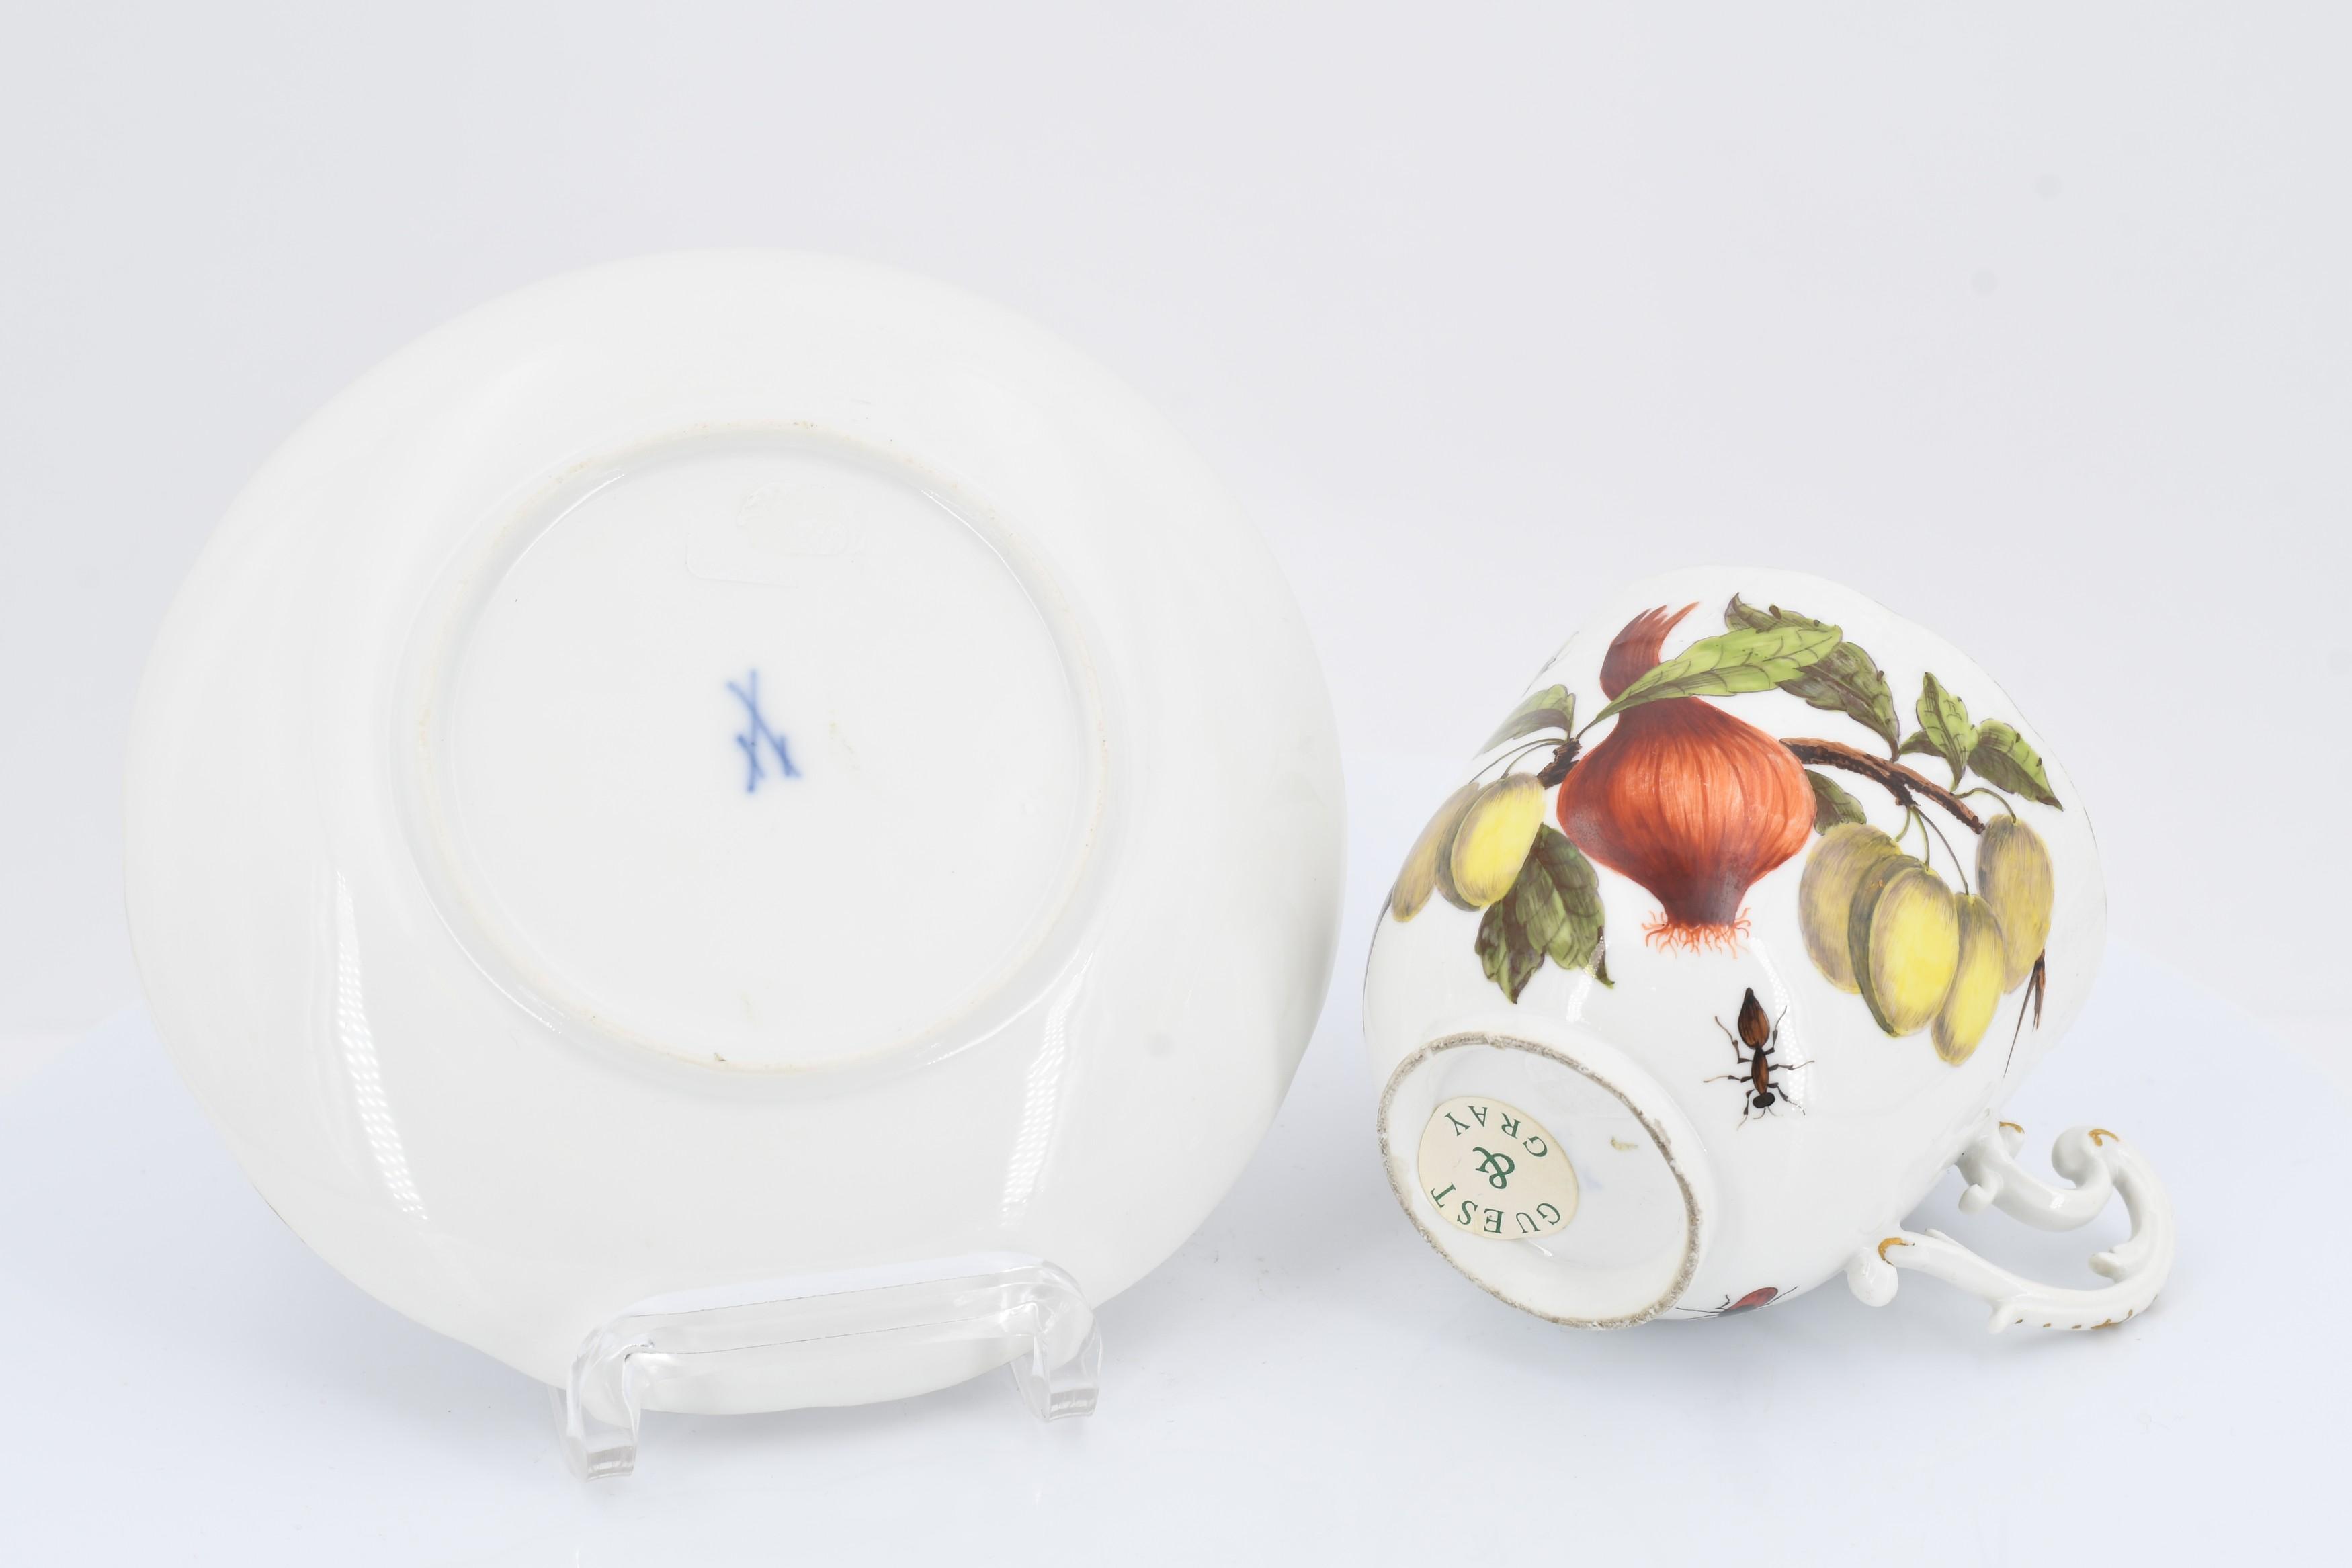 Cup and saucer with fruits and insects - Image 7 of 7